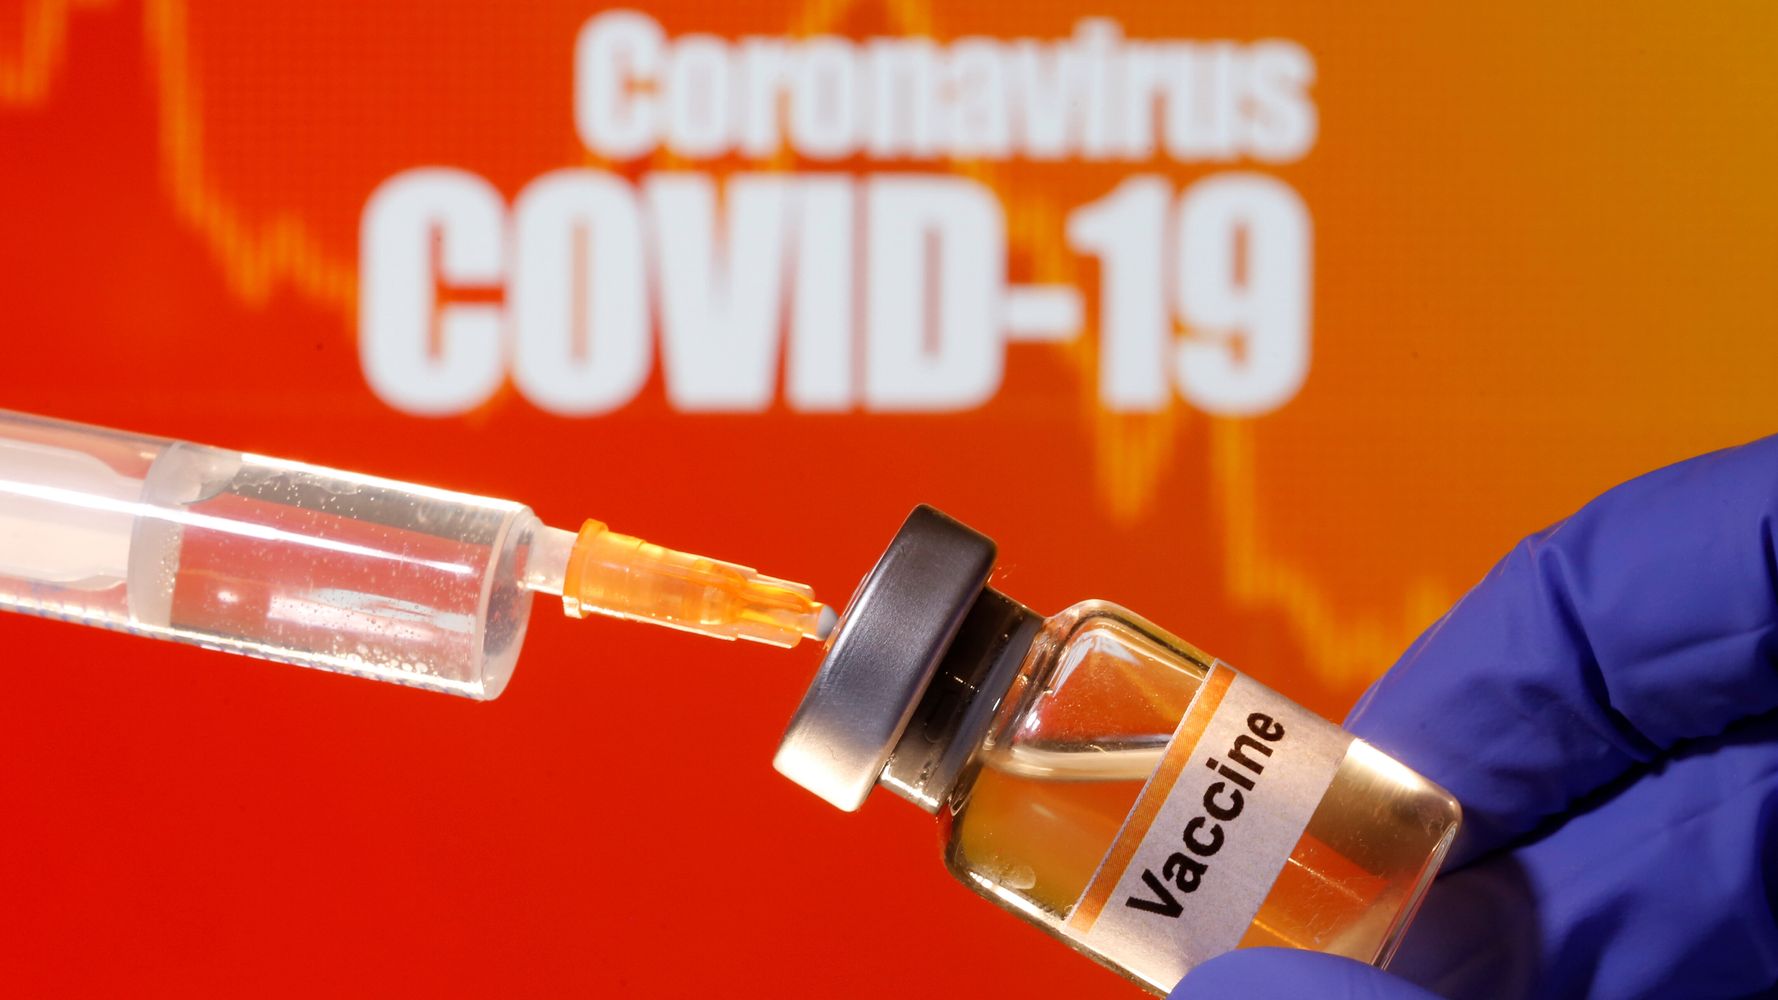 Sharp Rise In COVID-19 Cases Sees Europe In Vaccination Race Against Delta Variant